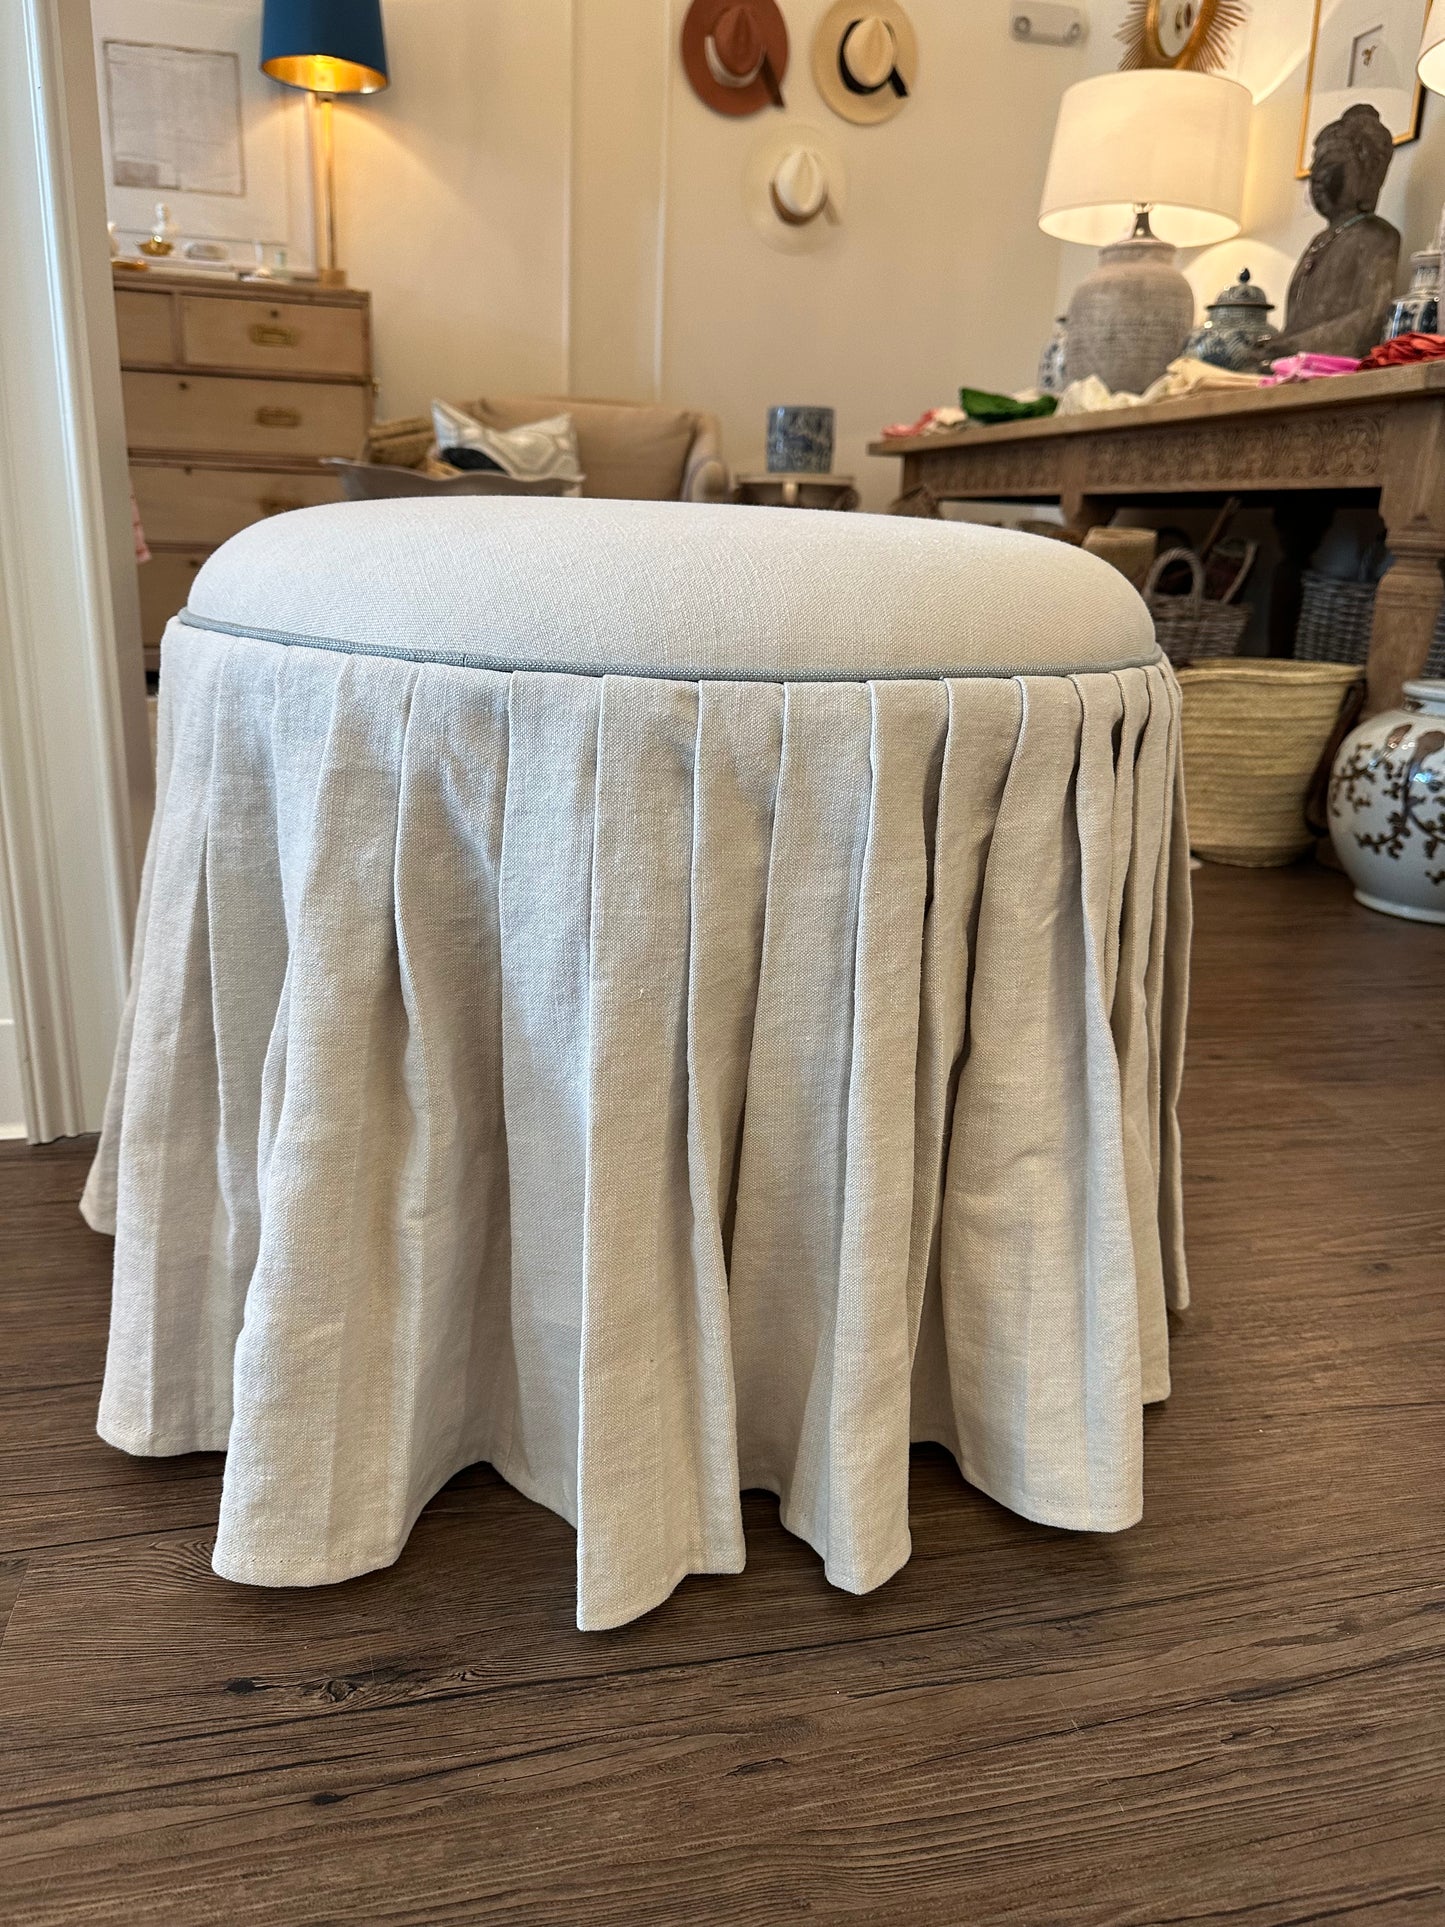 Pleated Ottoman Light Cream Fabric with Blue Piping Detail